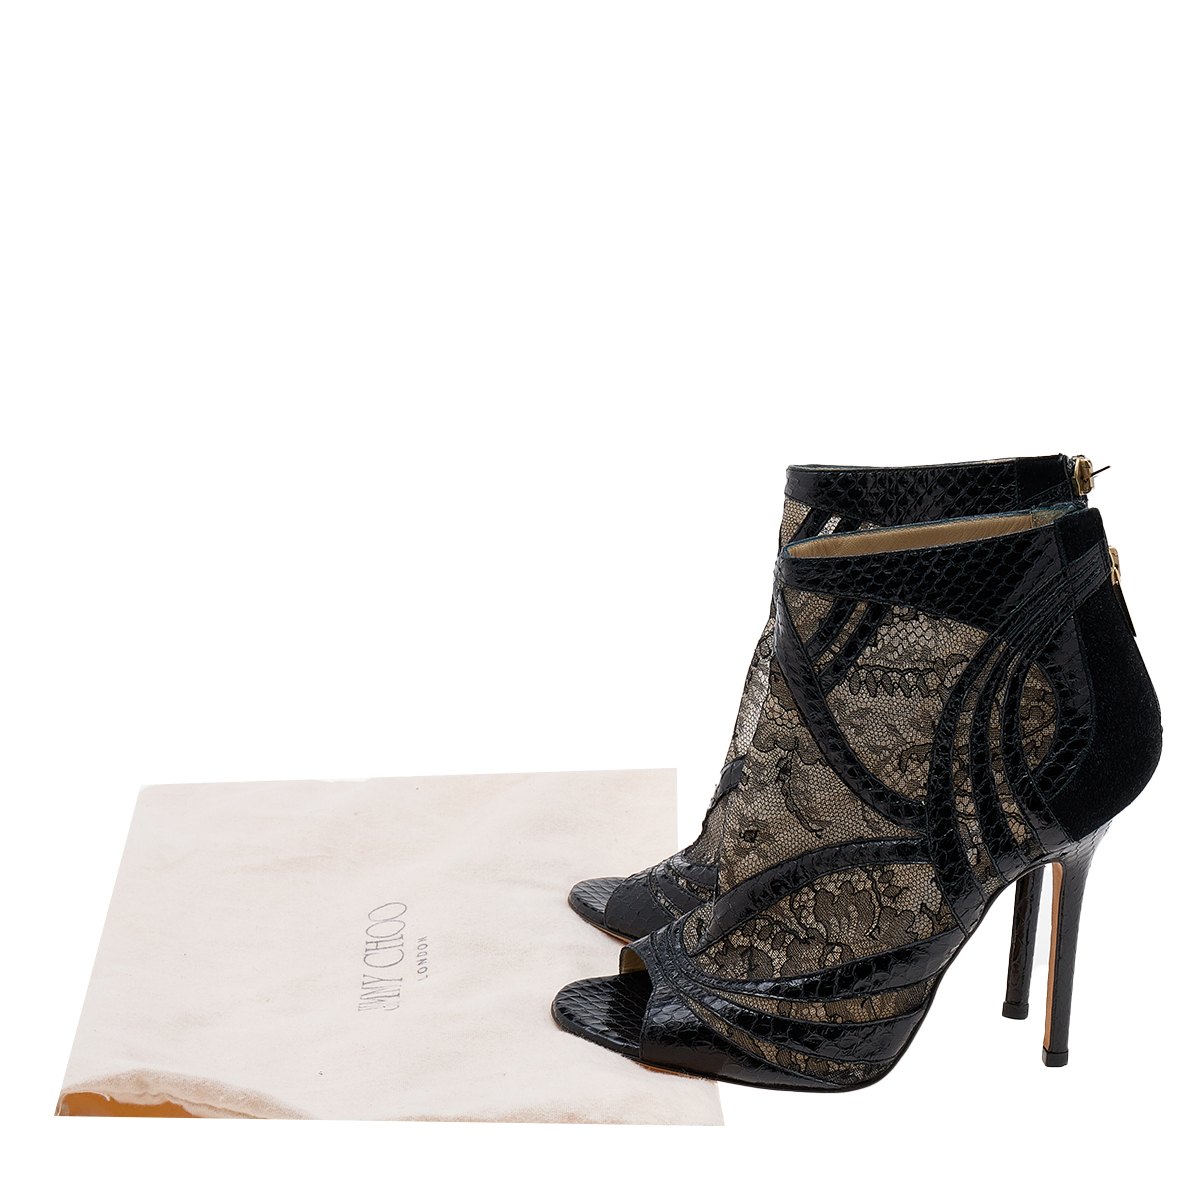 Jimmy Choo Black Snakeskin And Lace Peep Toe Booties Size 37.5